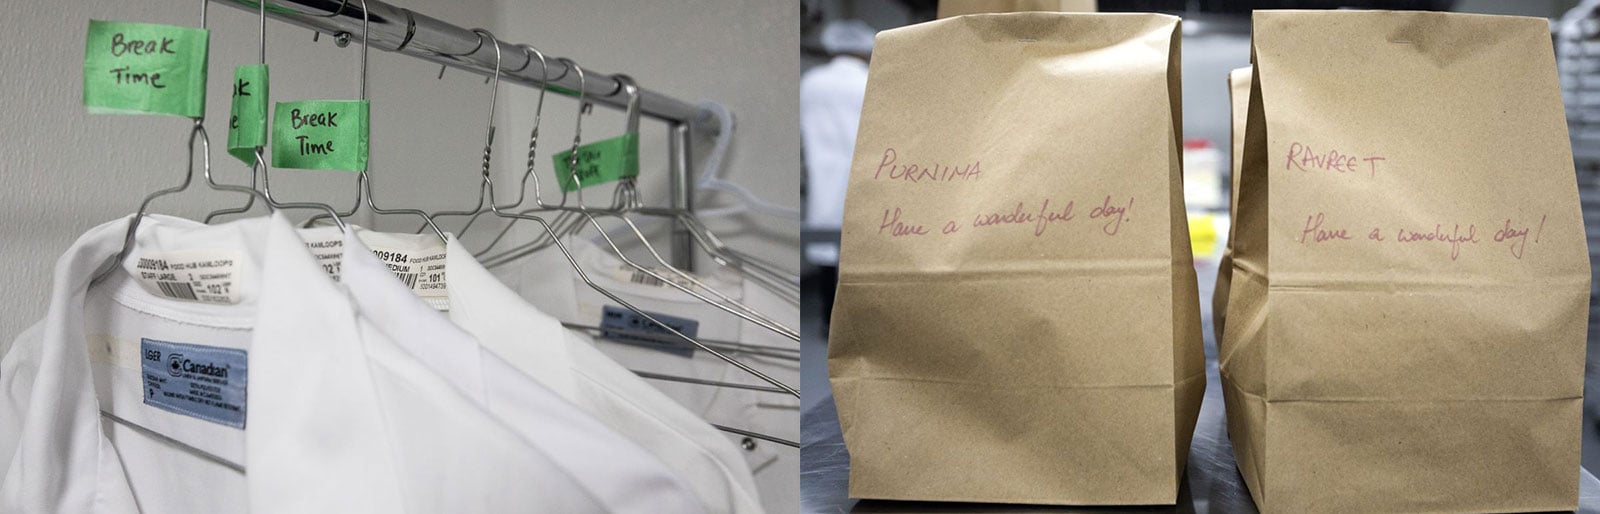 Two photos side by side. On the left, white chef coats hang on wire coat hangers on a metal rack, with green labels reading 'Break Time' on each hanger. On the right, two brown paper bags with handwritten customers' names and the words 'Have a wonderful day!' on them.